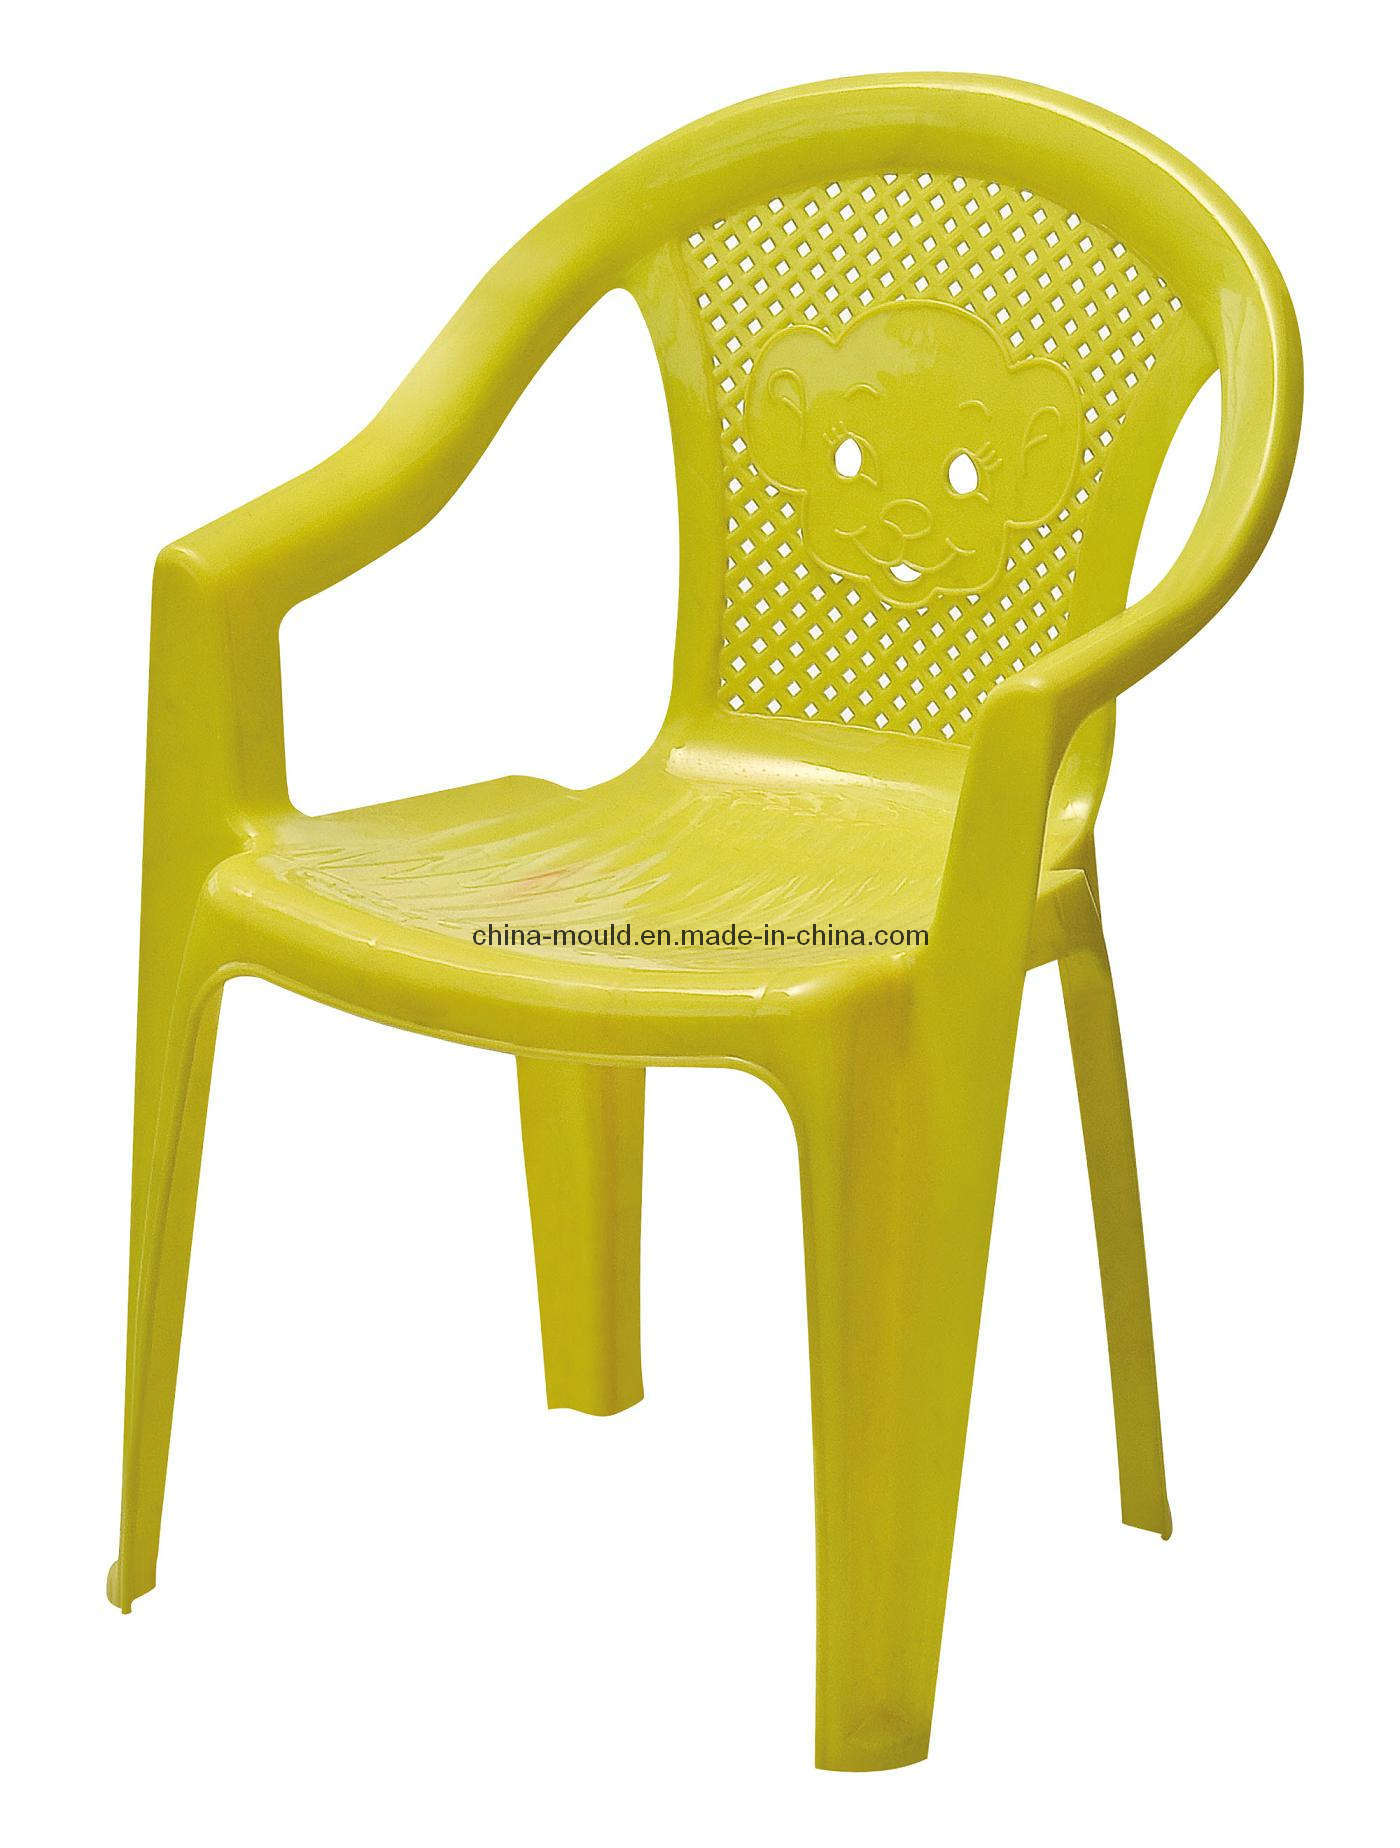 Chair Moulds (RK-10)